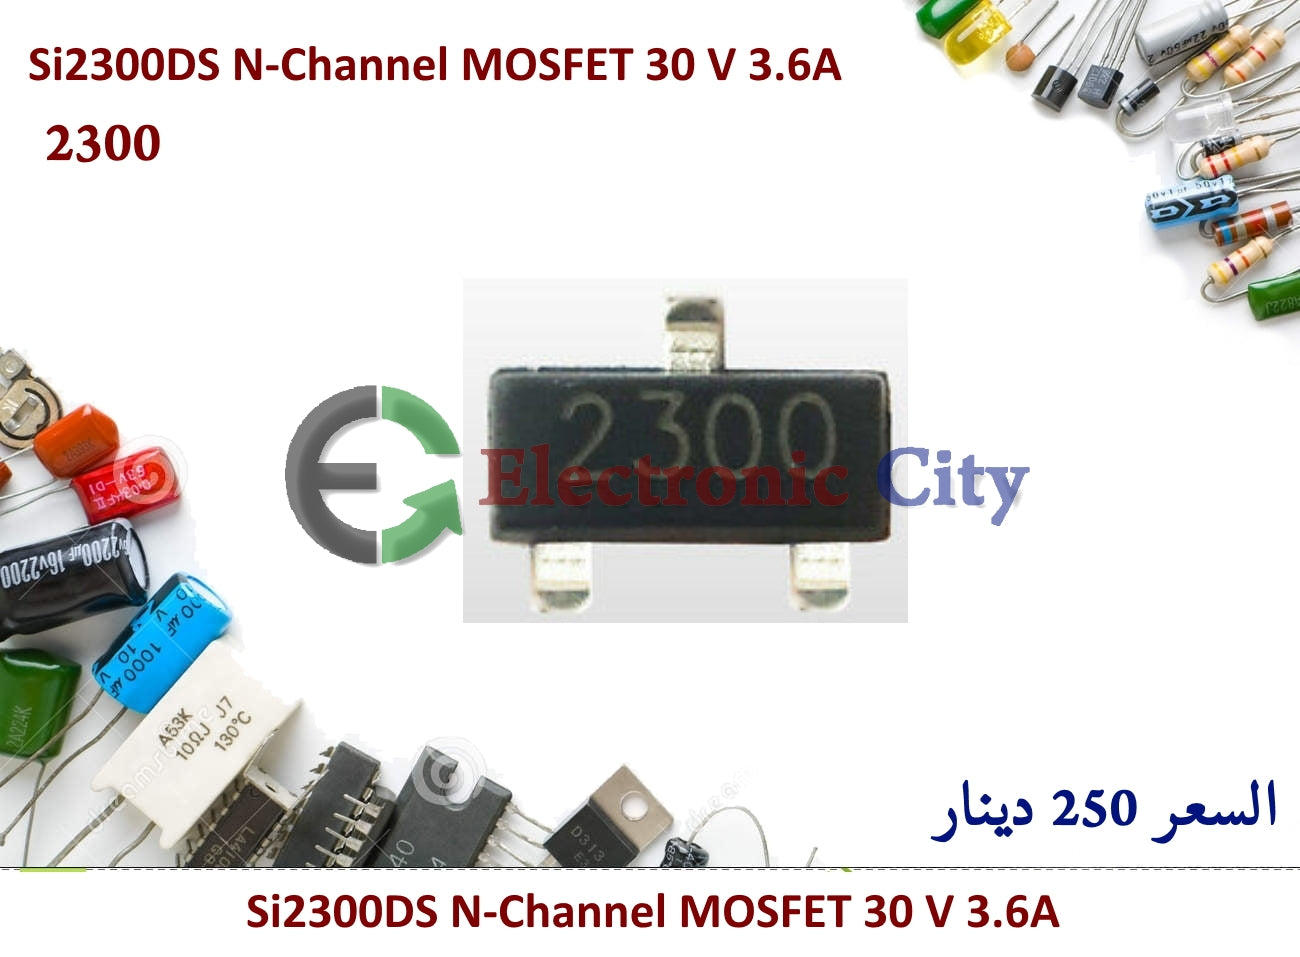 Si2300DS N-Channel MOSFET 30 V 3.6A